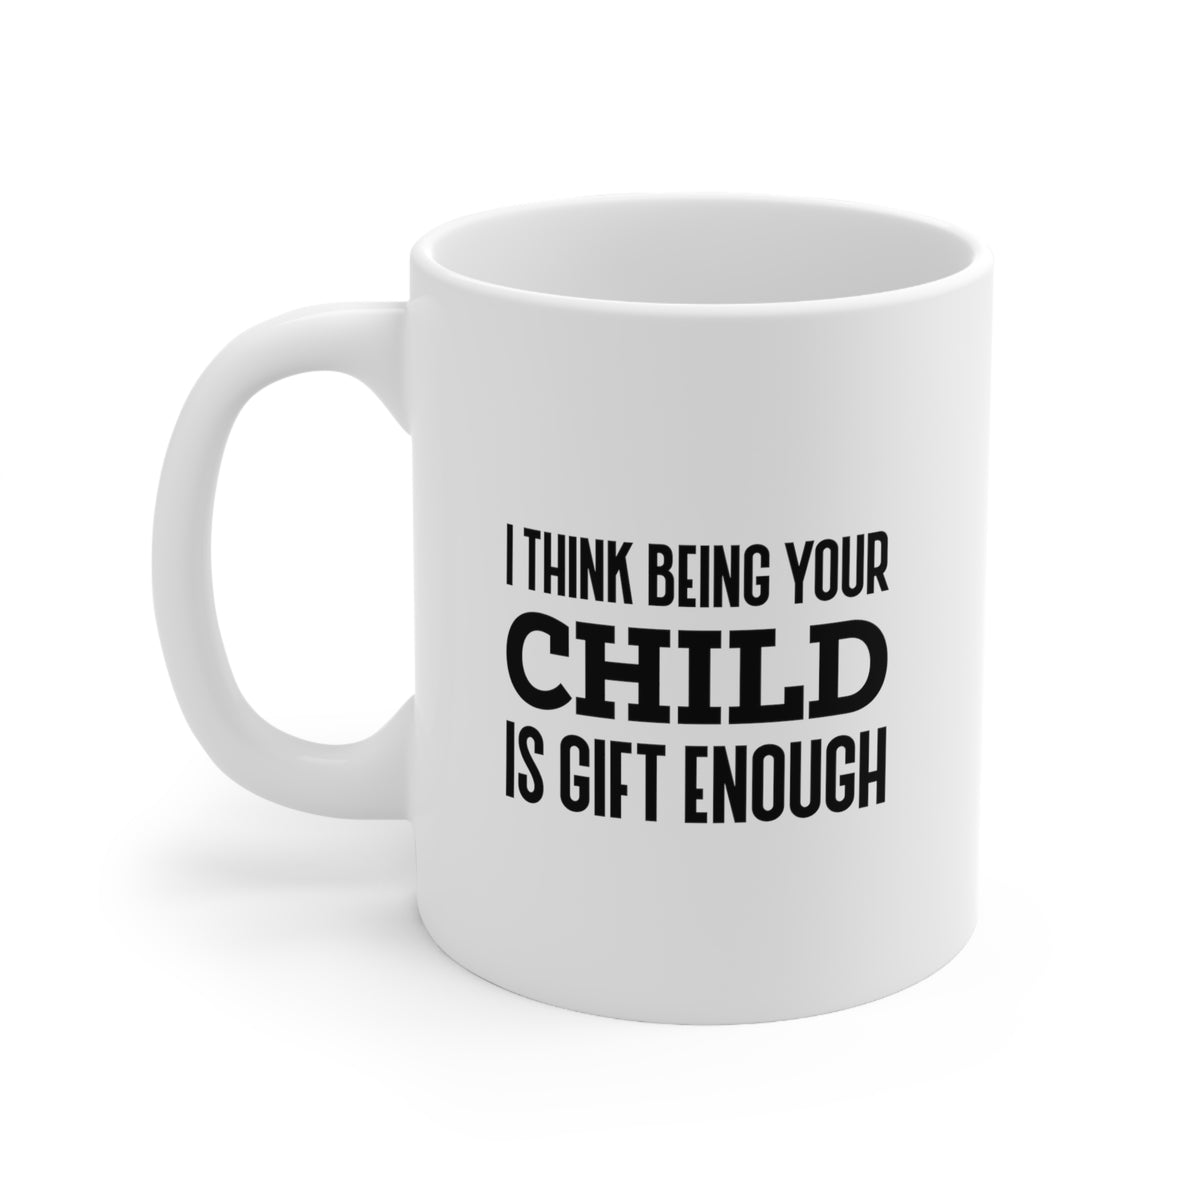 Proud Gifts Funny Mother’s Day Coffee Mug For Mom - I think being your child is gift enough - Best Birthday Present From Daughter, Son